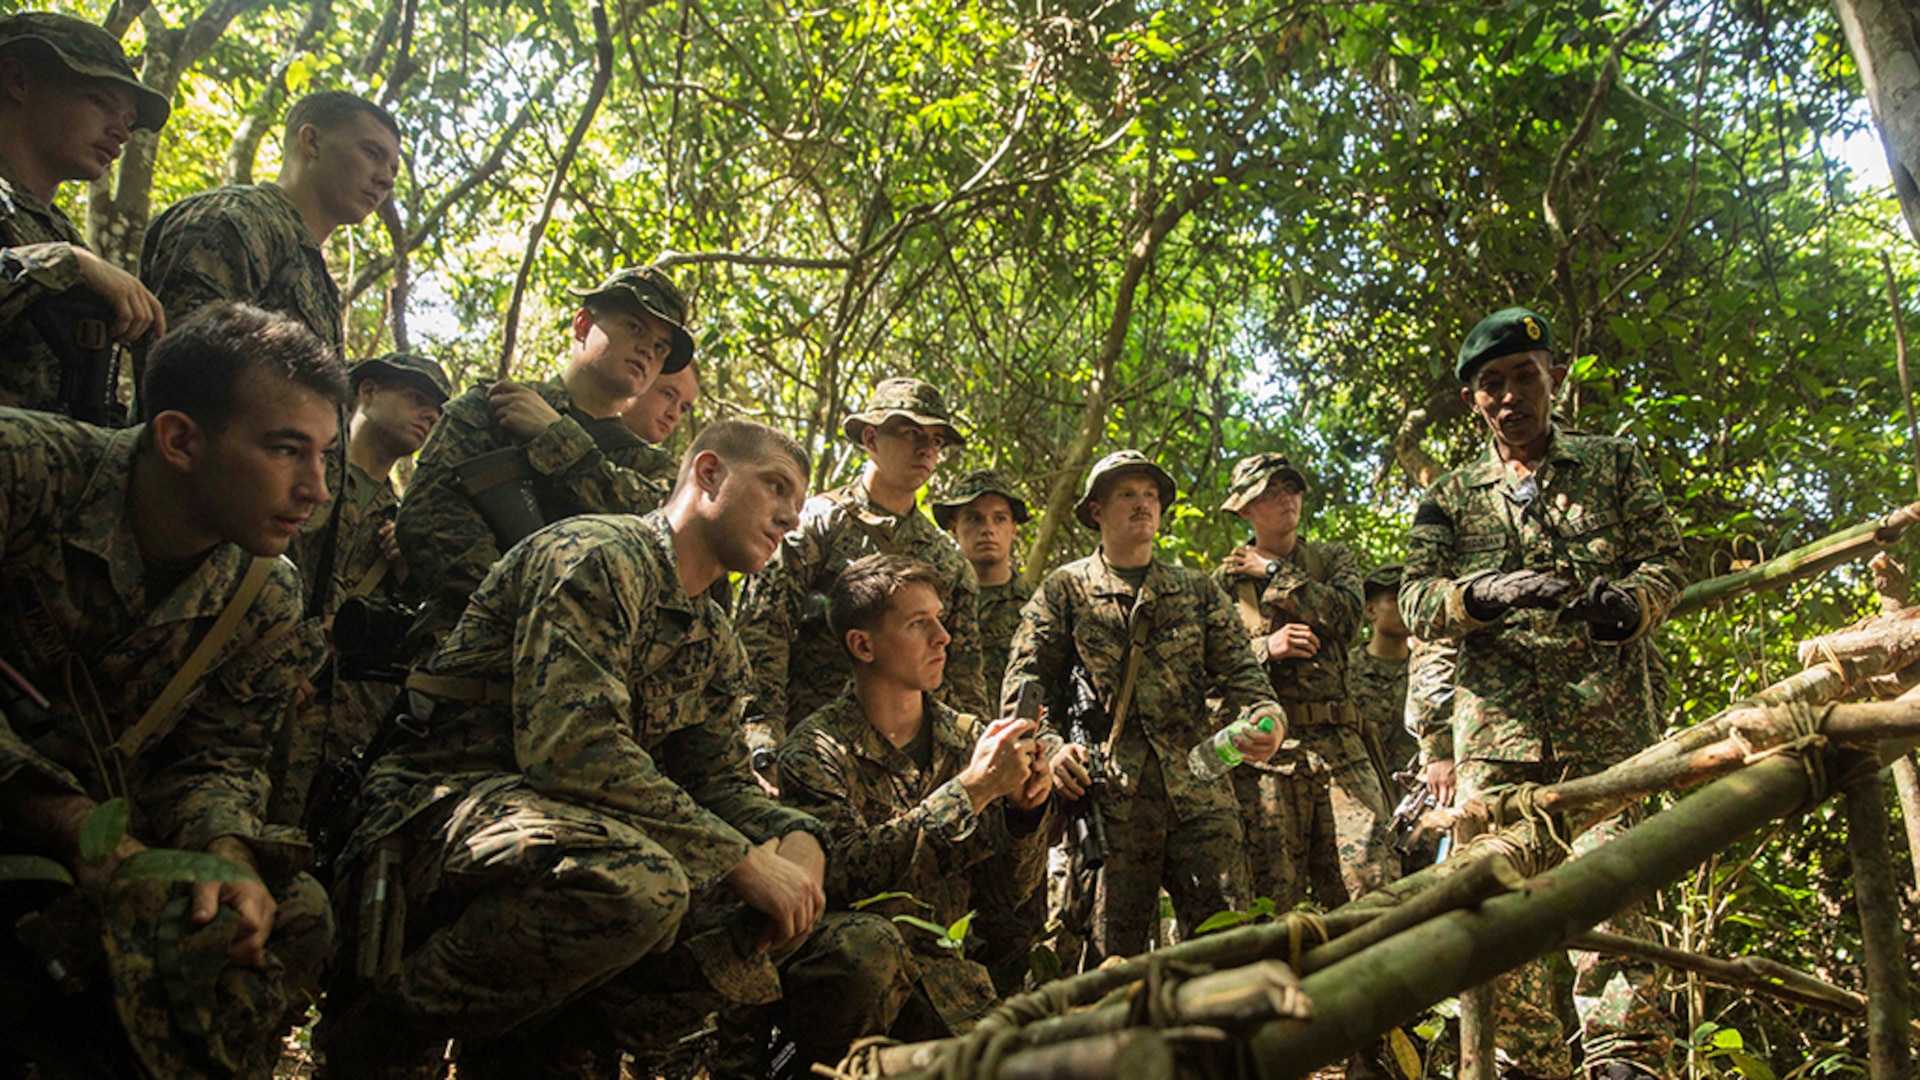 TANDUO, Malaysia (Nov. 11, 2015)- A Malaysian Army officer explains to U.S. Marines with Kilo Company, Battalion Landing Team 3rd Battalion, 1st Marine Regiment, 15th Marine Expeditionary Unit, how to build a wild game trap using vines and wood in a jungle survival course during Malaysia-United States Amphibious Exercise 2015. During the course, Marines learned to build multiple traps, and snares. The purpose of the exercise was to strengthen military cooperation in the planning and execution of amphibious operations between Malaysian armed forces and U.S. Marines. The 15th MEU is currently deployed in the Indo-Asia-Pacific region to promote regional stability and security in the U.S. 7th Fleet area of operations. 